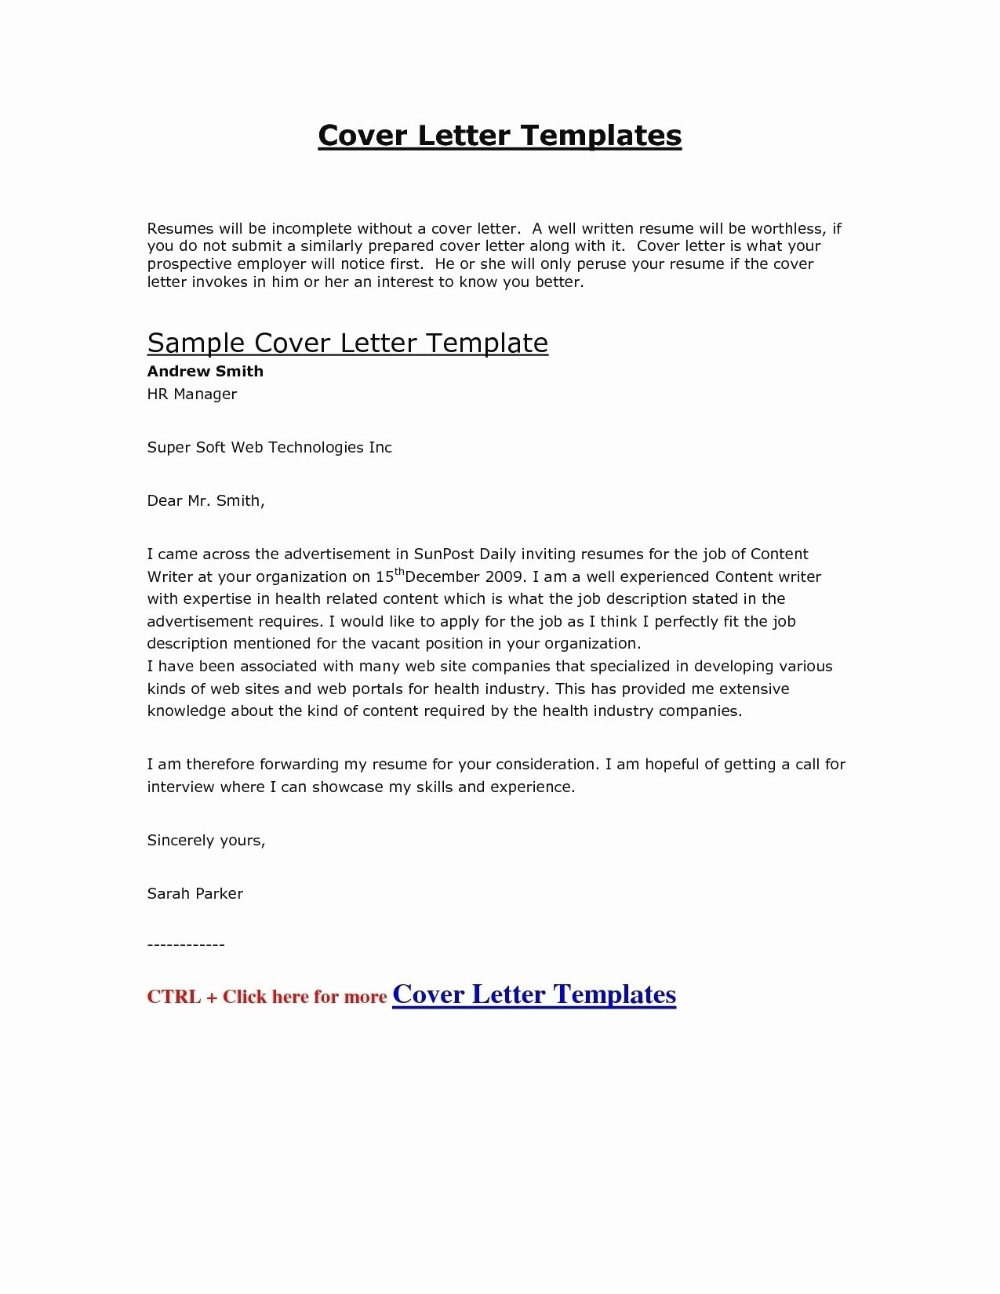 Free How To Write A Letter To A Judge Template